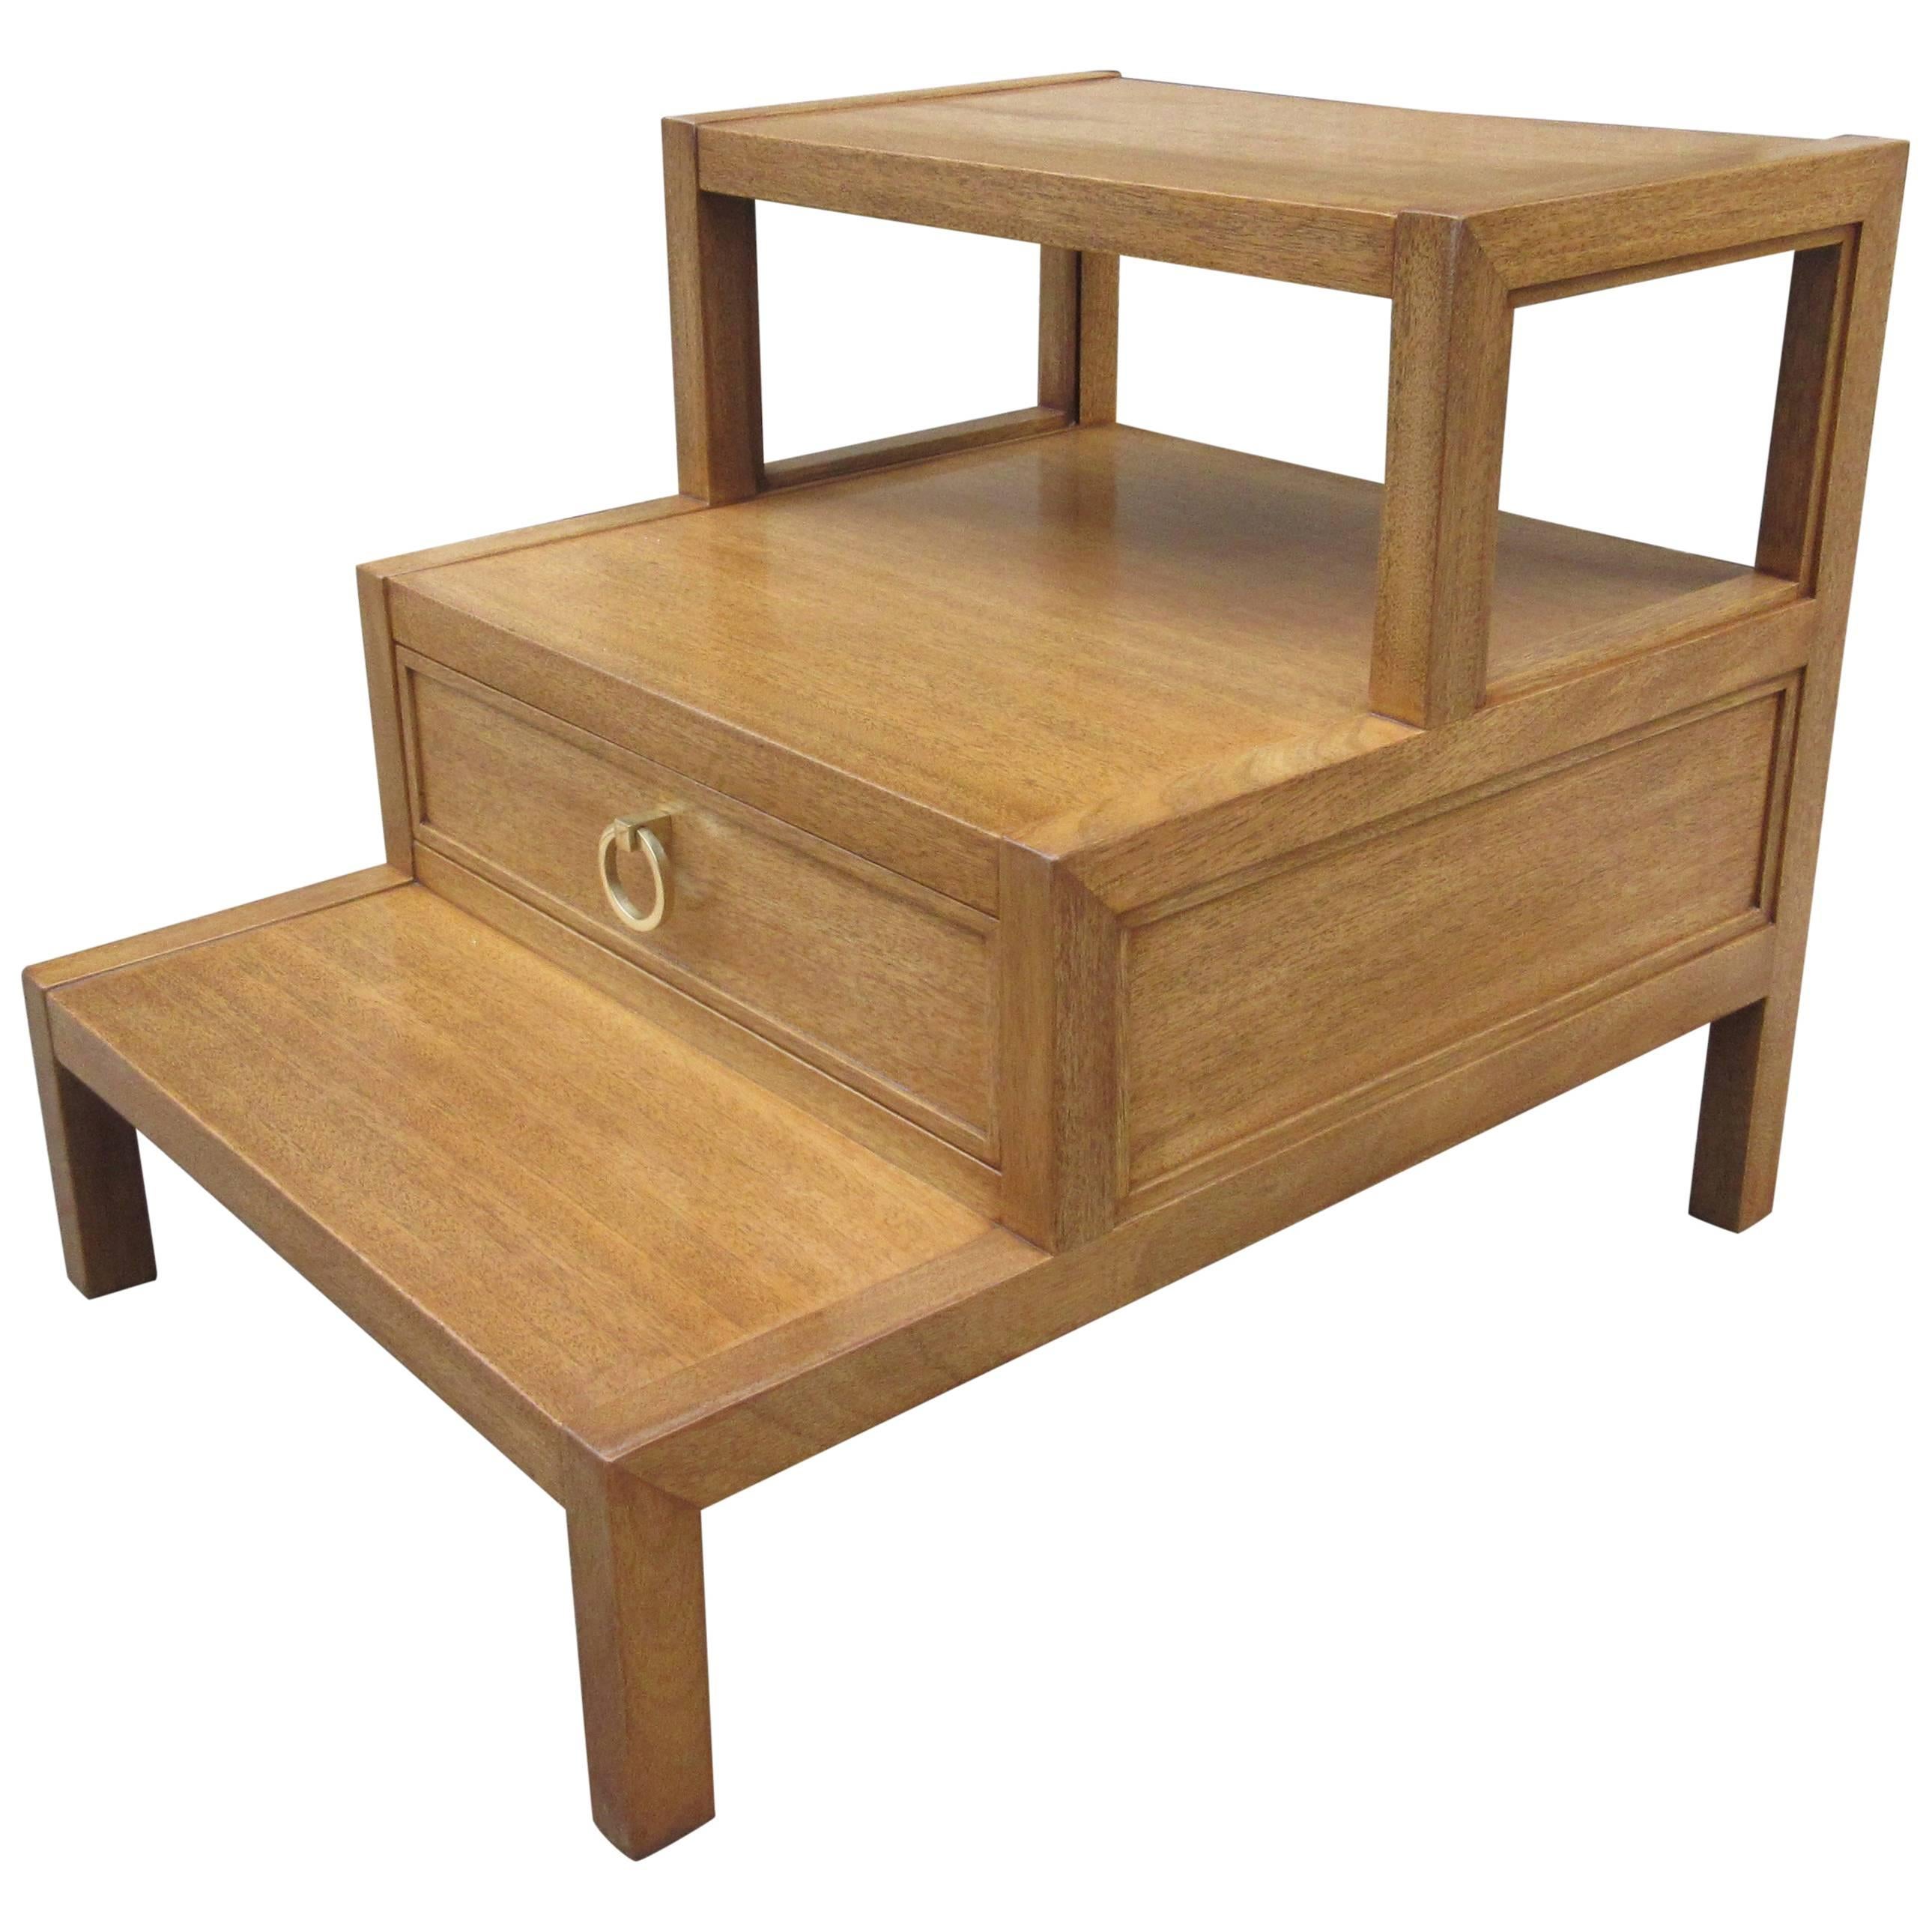 John Widdicomb for Widdicomb Stepped Side Table with Drawer in Honey Mahogany